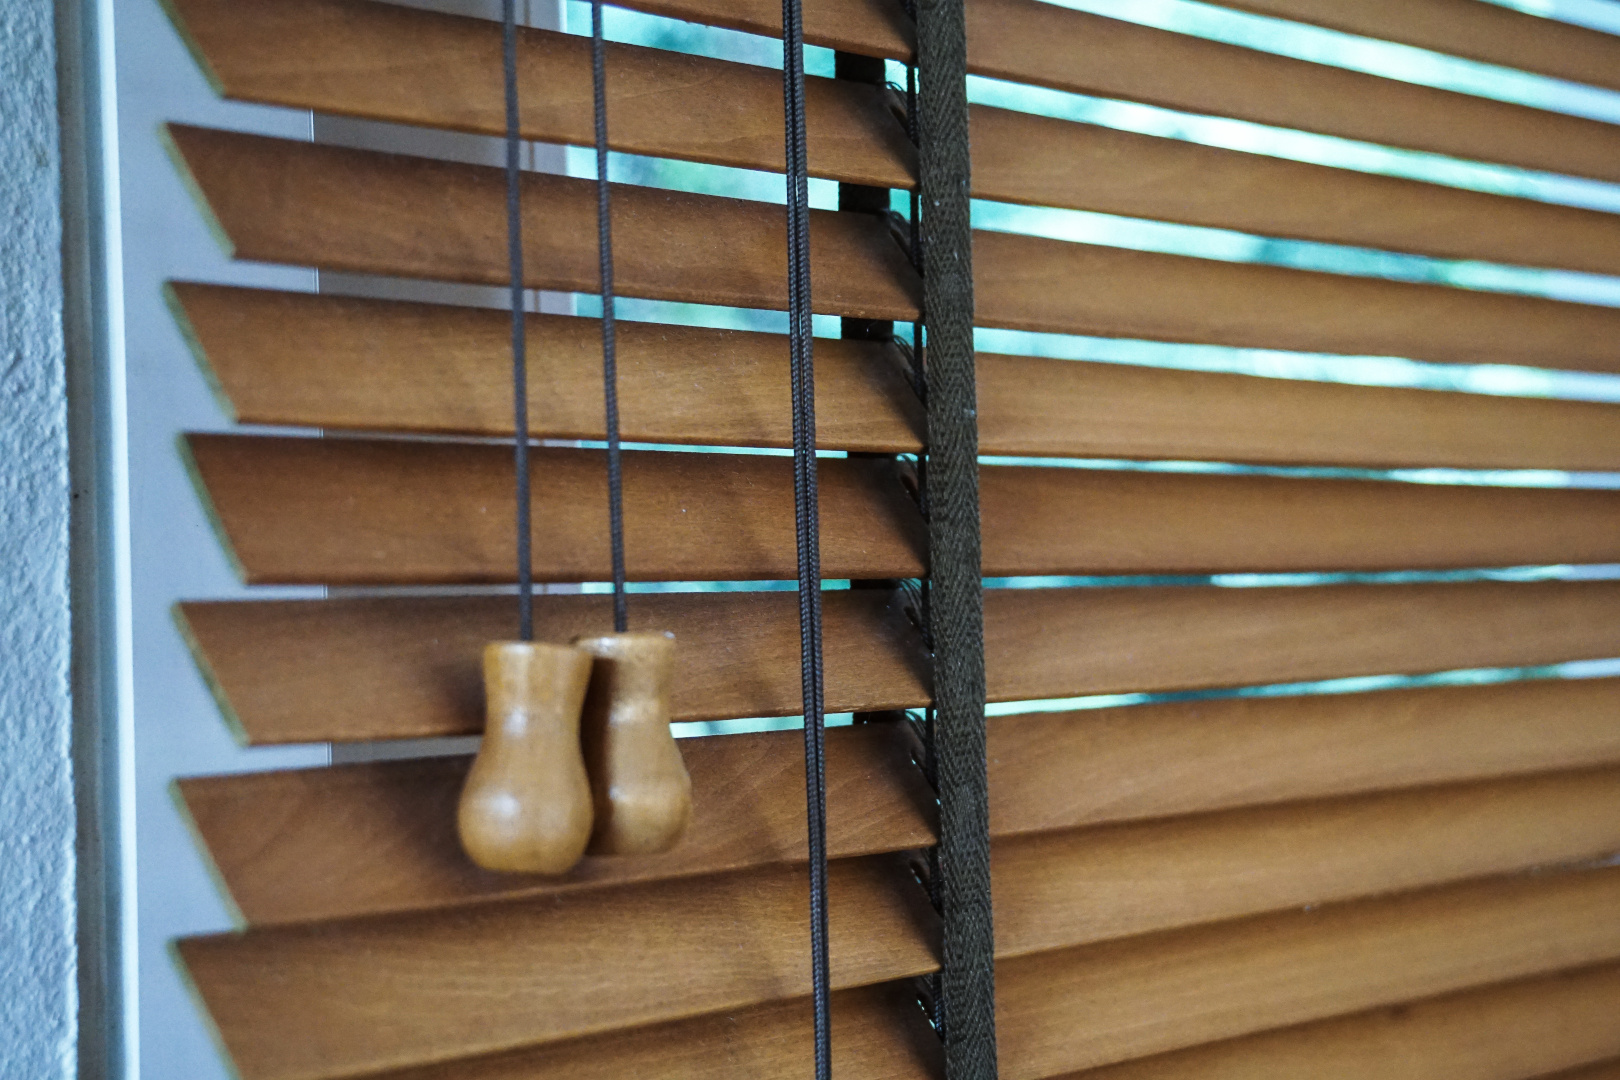 All wooden blinds in the knall store